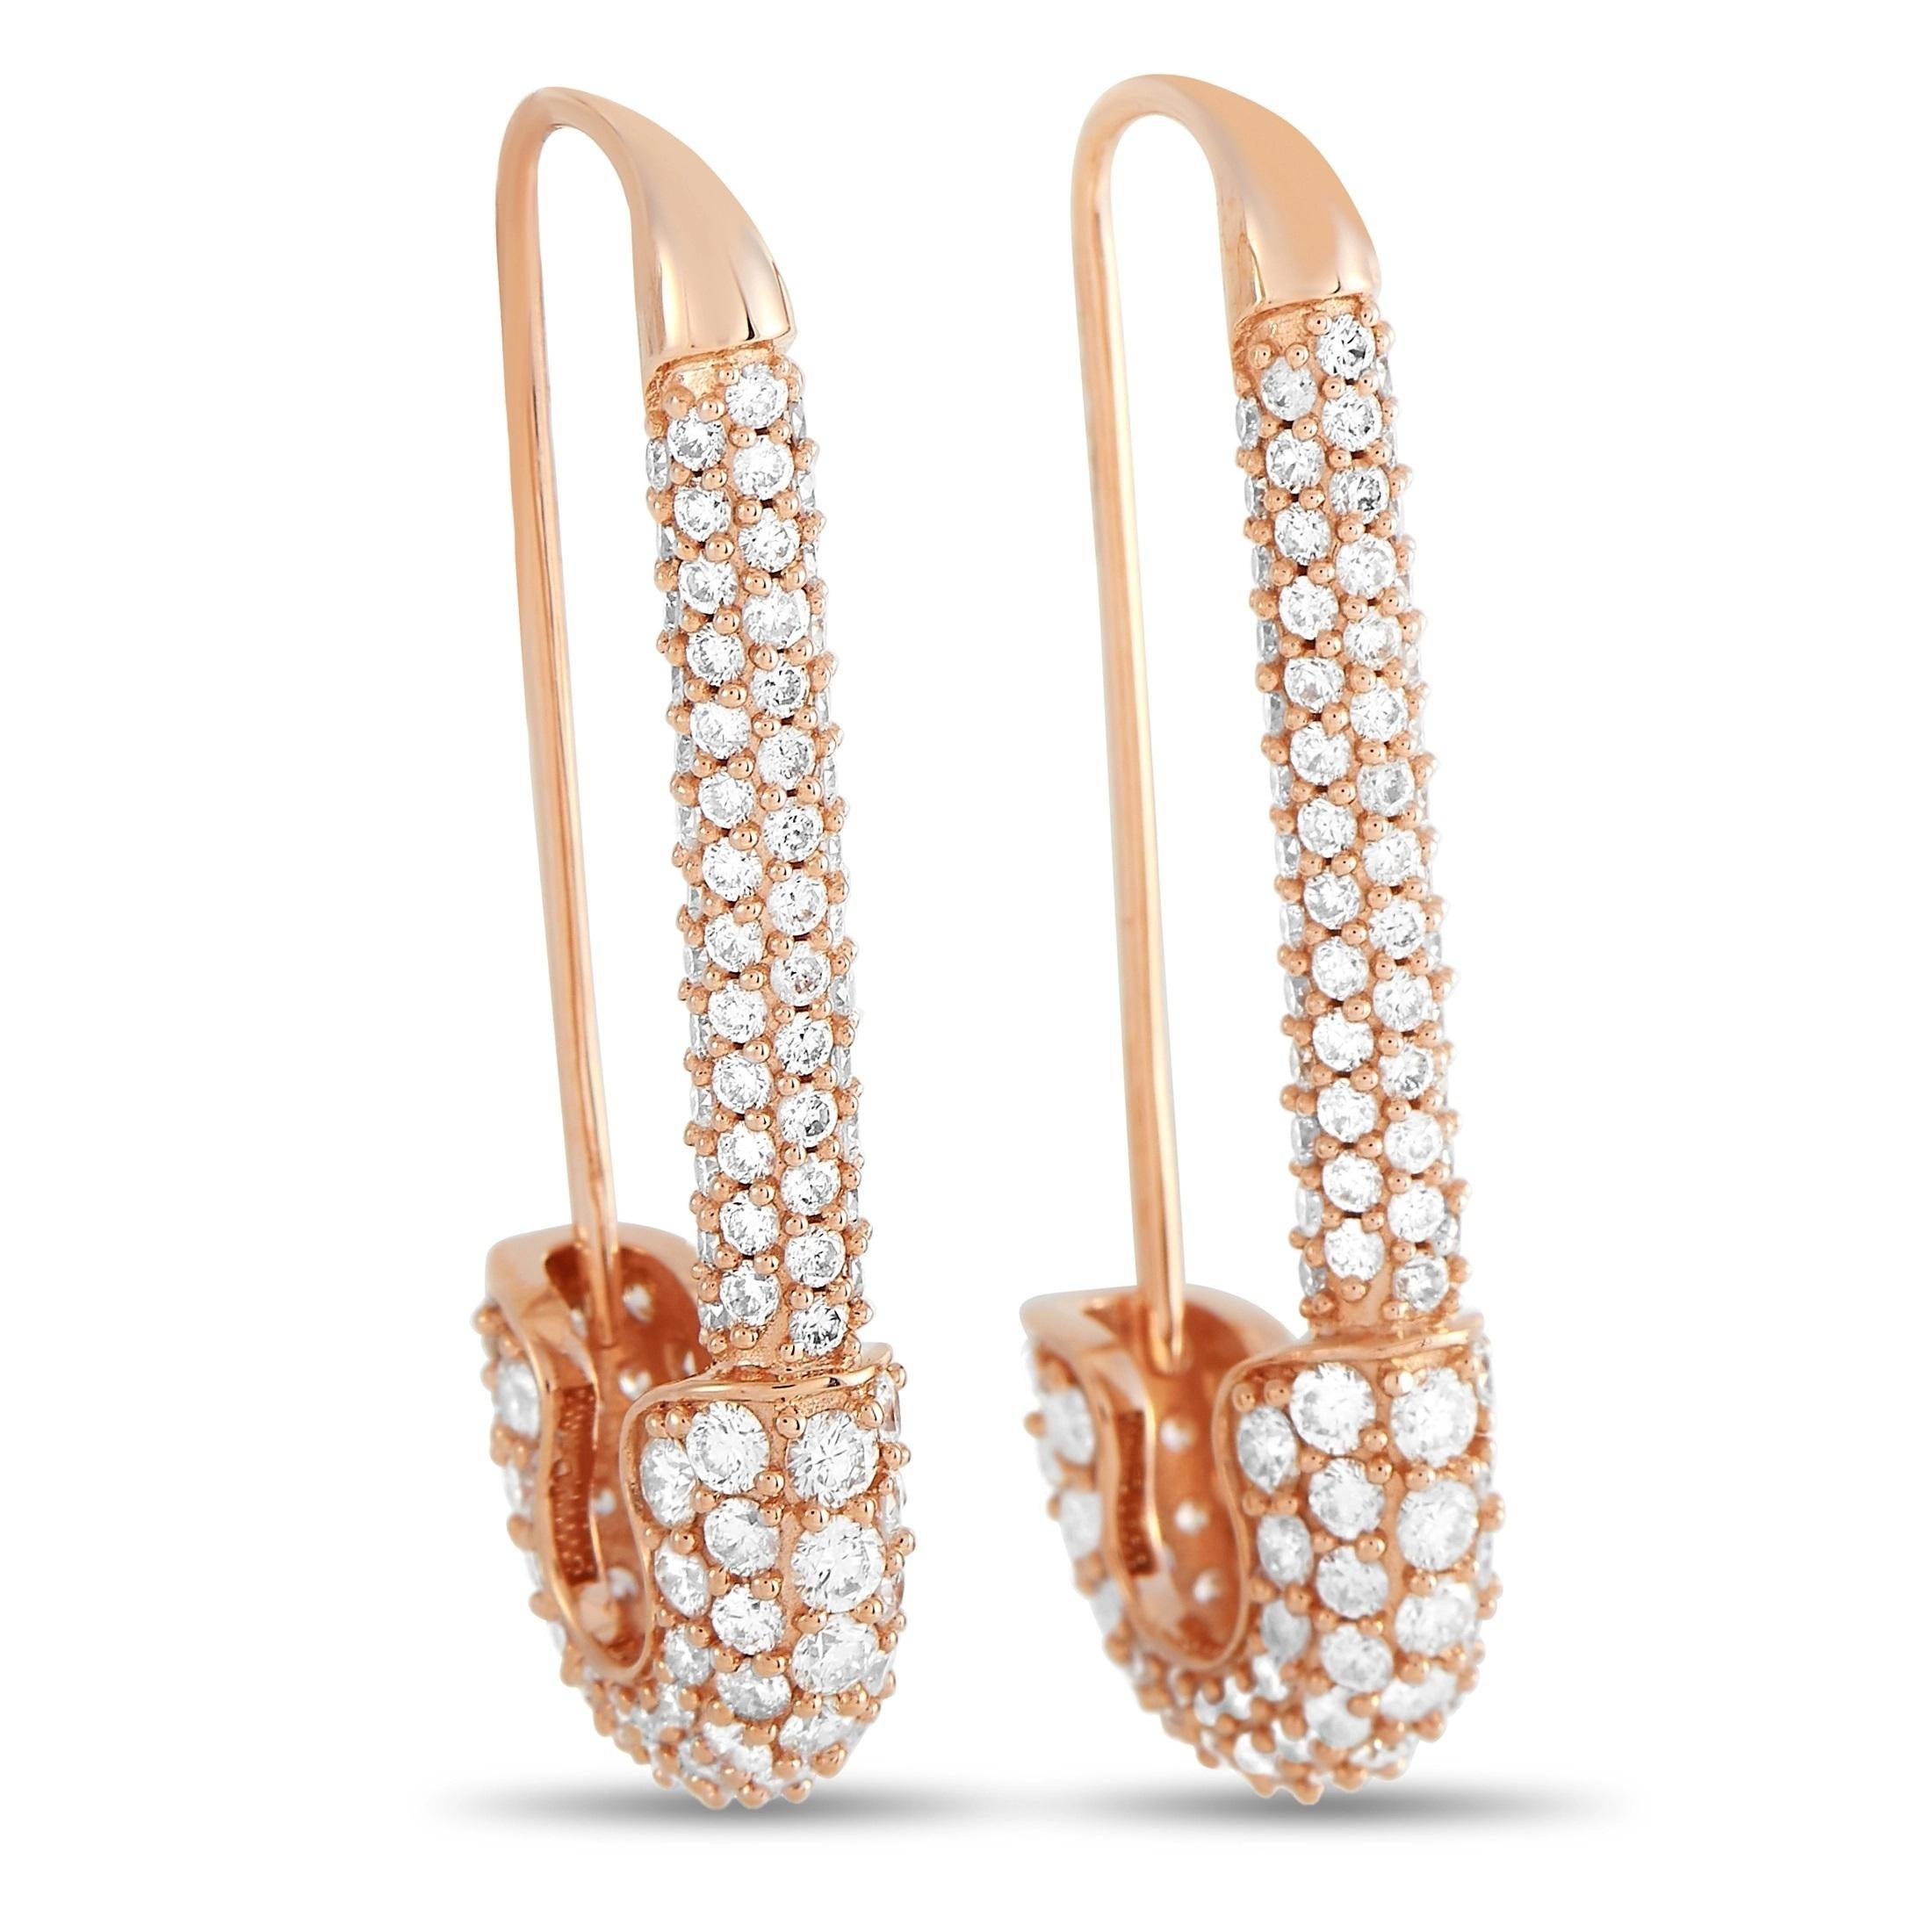 A unique safety pin shape adds charm to these luxury earrings. Crafted from 18K Rose Gold, they sparkle and shine thanks to inset diamonds with a total weight of 3.25 carats. They measure 1.37” long, 0.55” wide, and will earn you plenty of